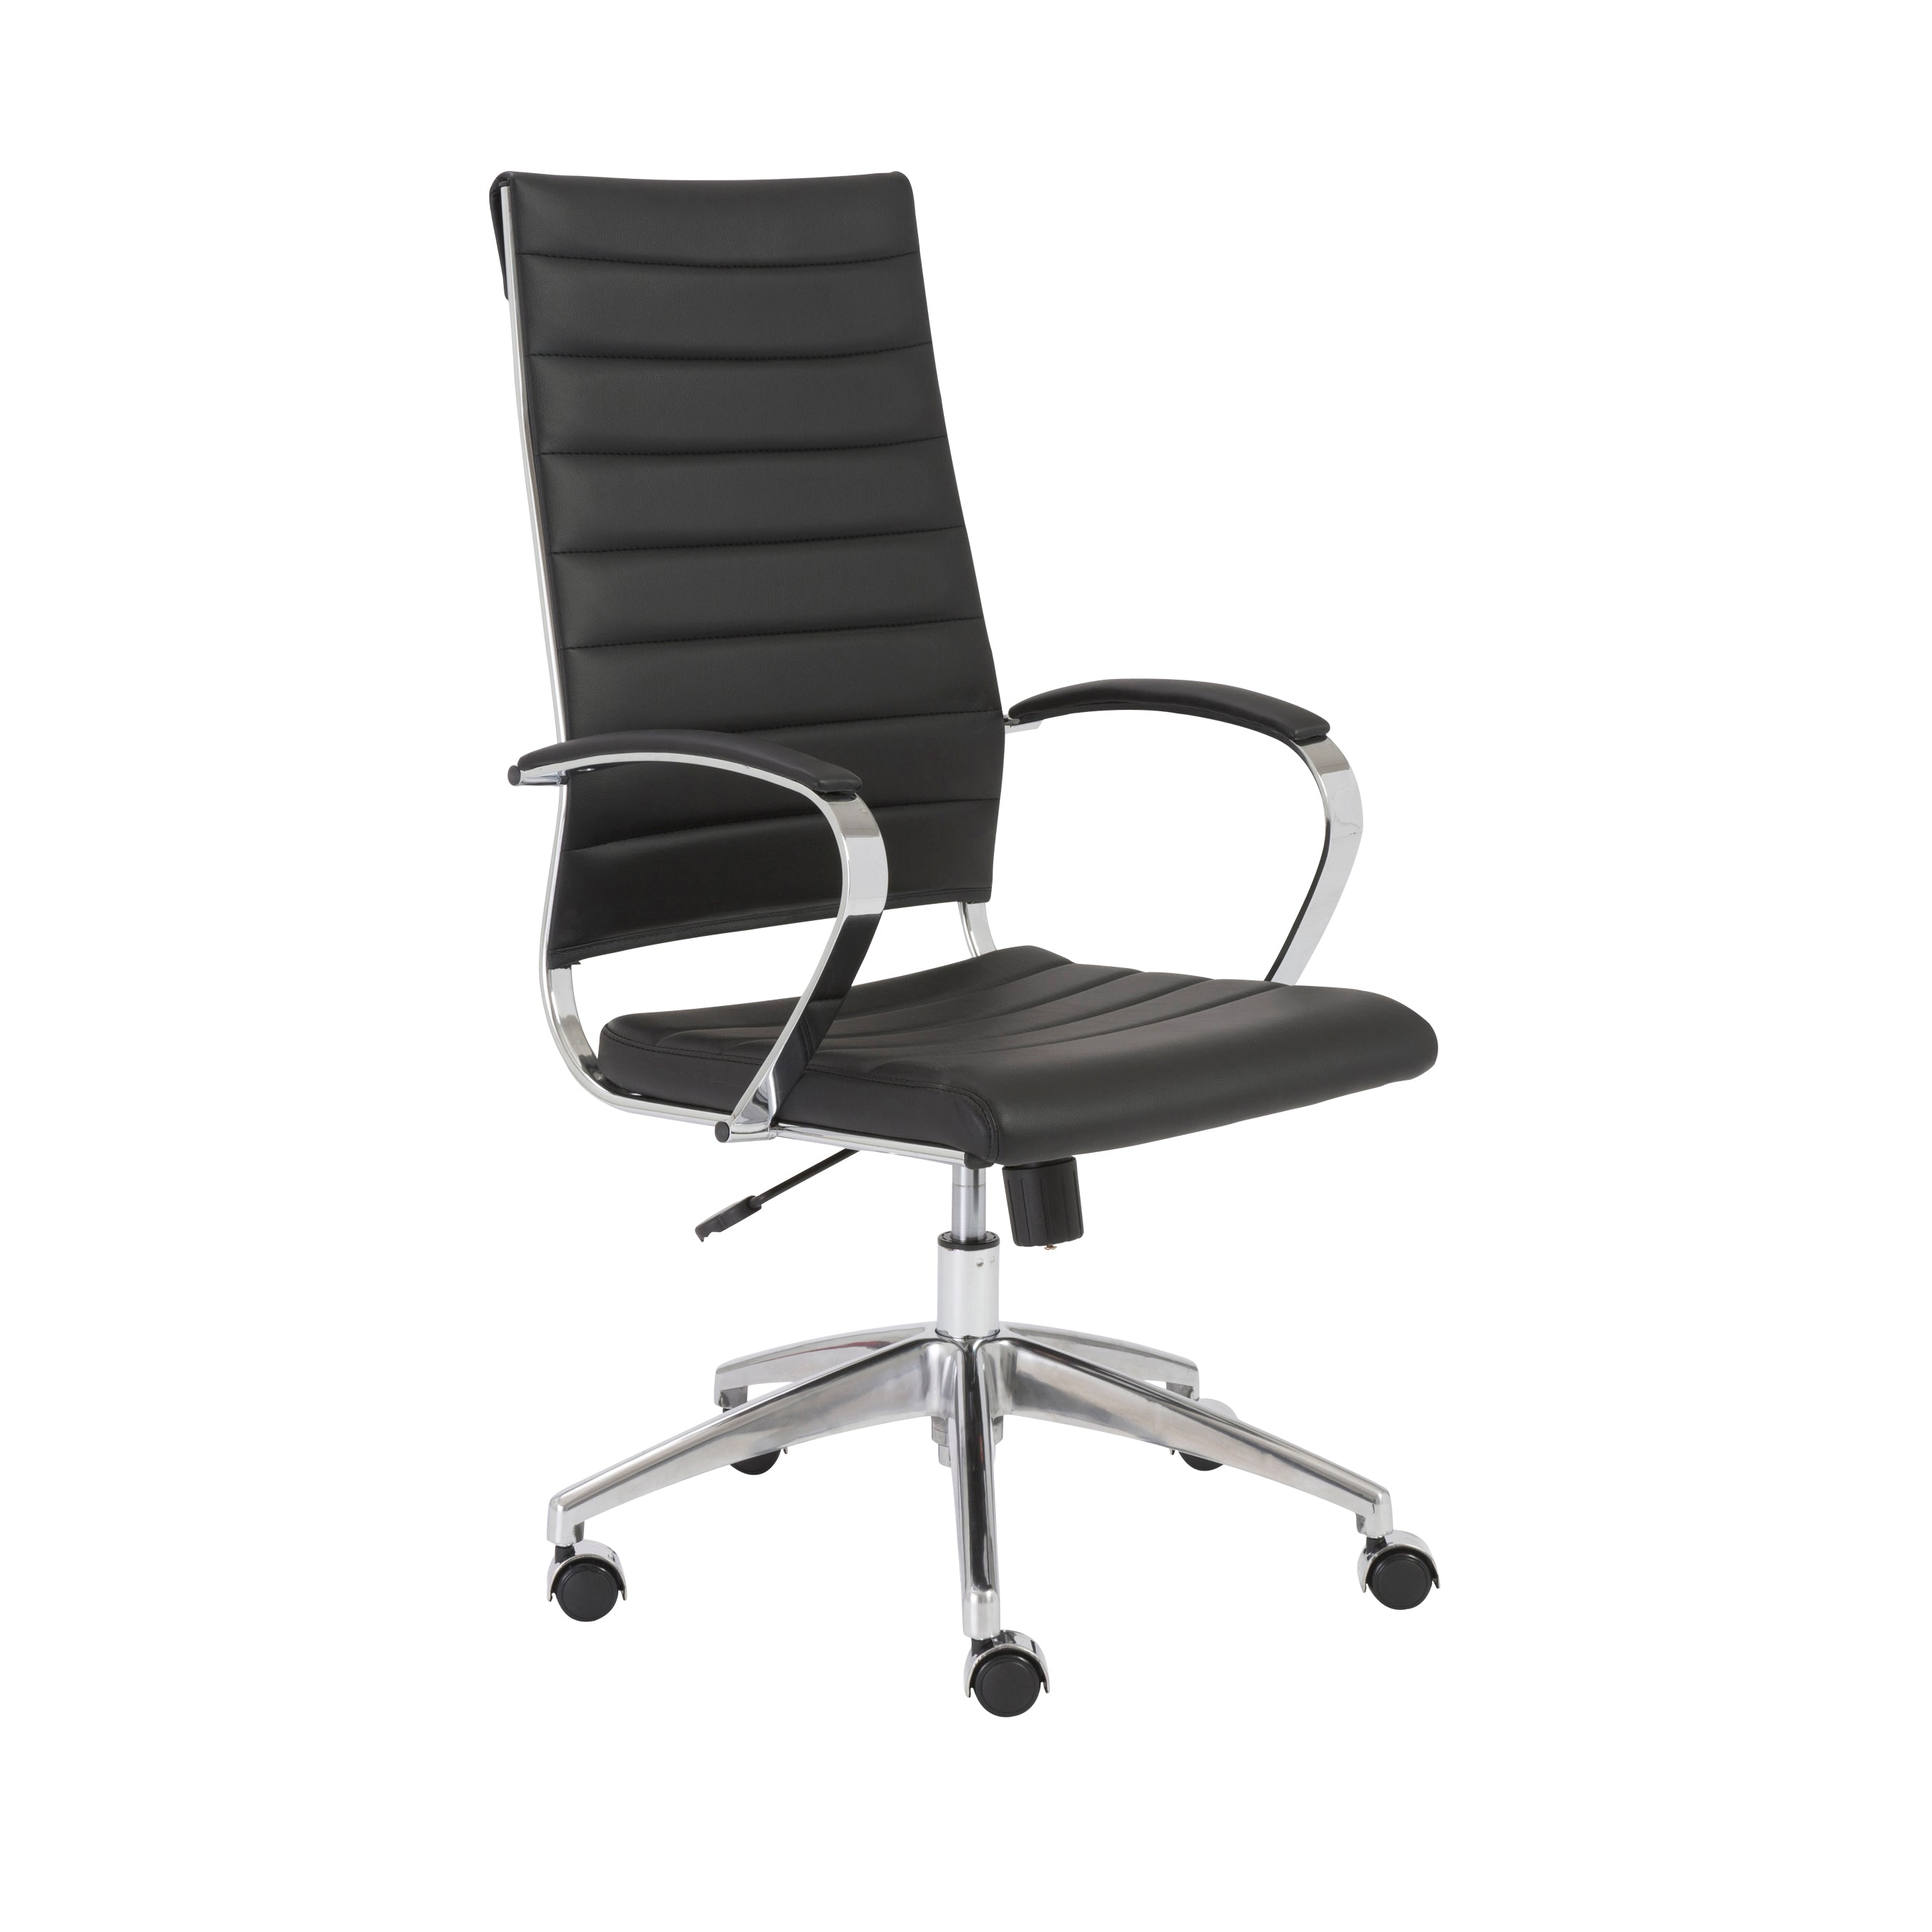 Euro Style Task Chairs - Axel High Back Office Chair in Black with Aluminum Base